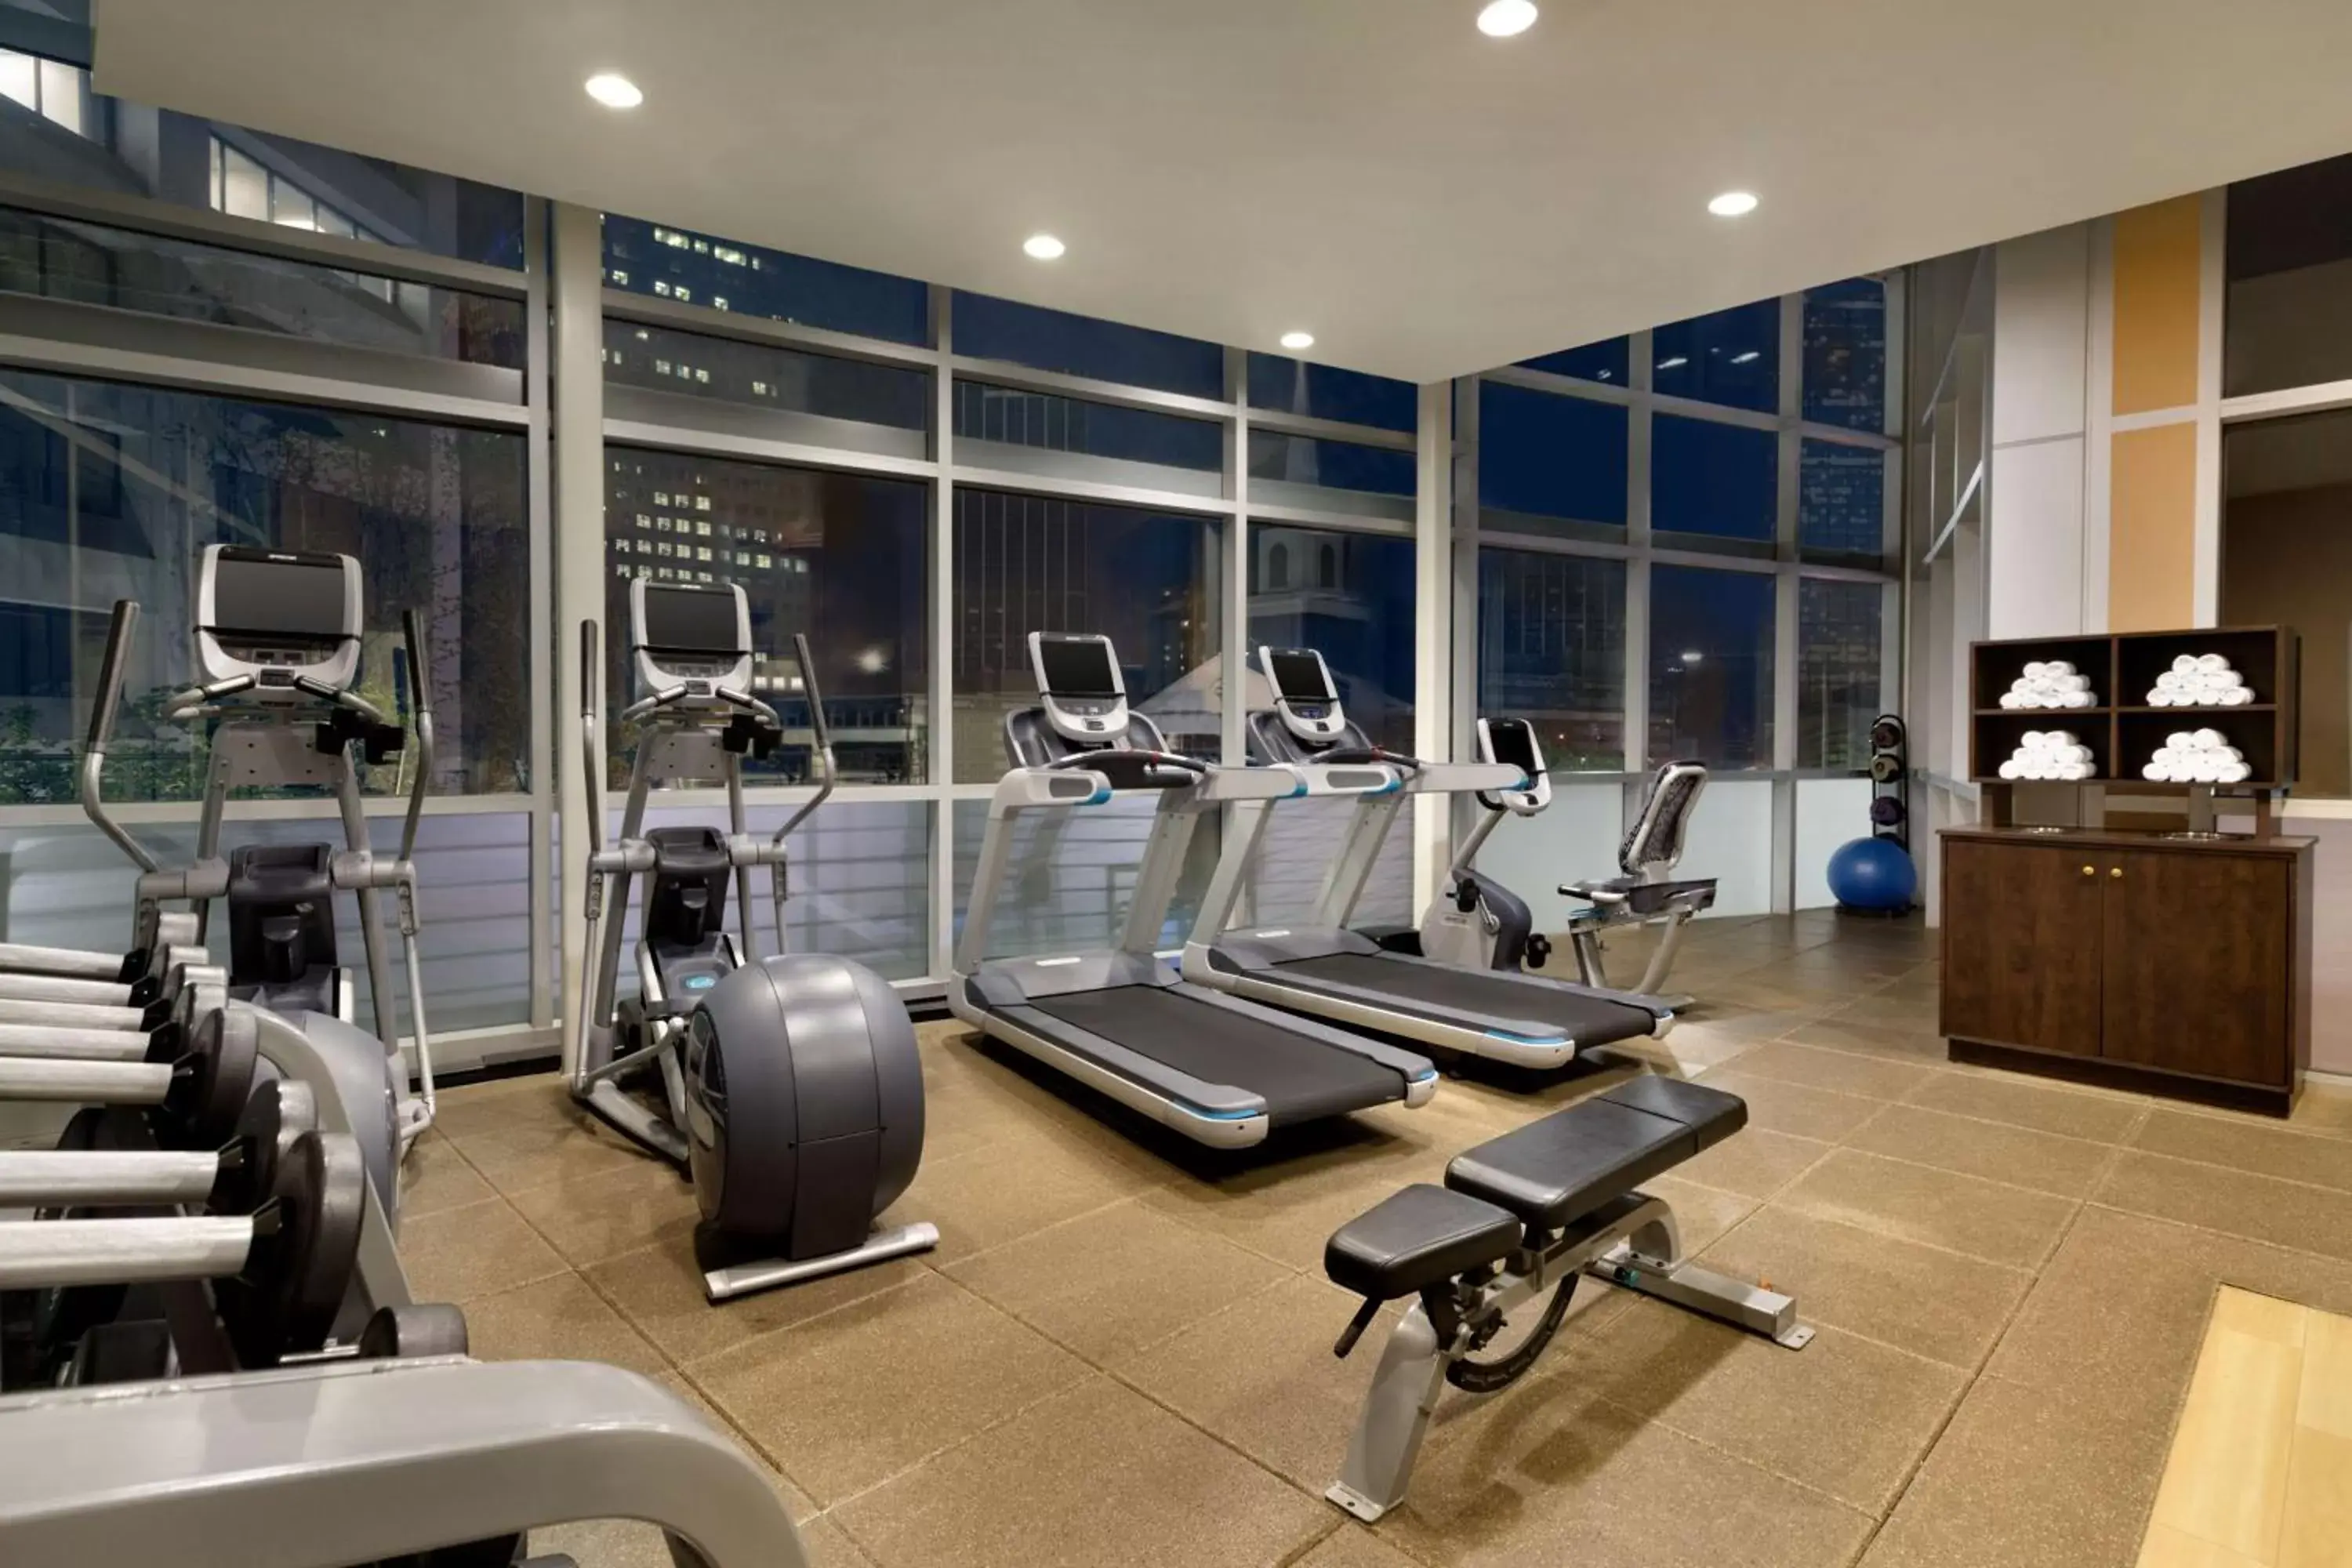 Fitness centre/facilities, Fitness Center/Facilities in Embassy Suites Los Angeles Glendale